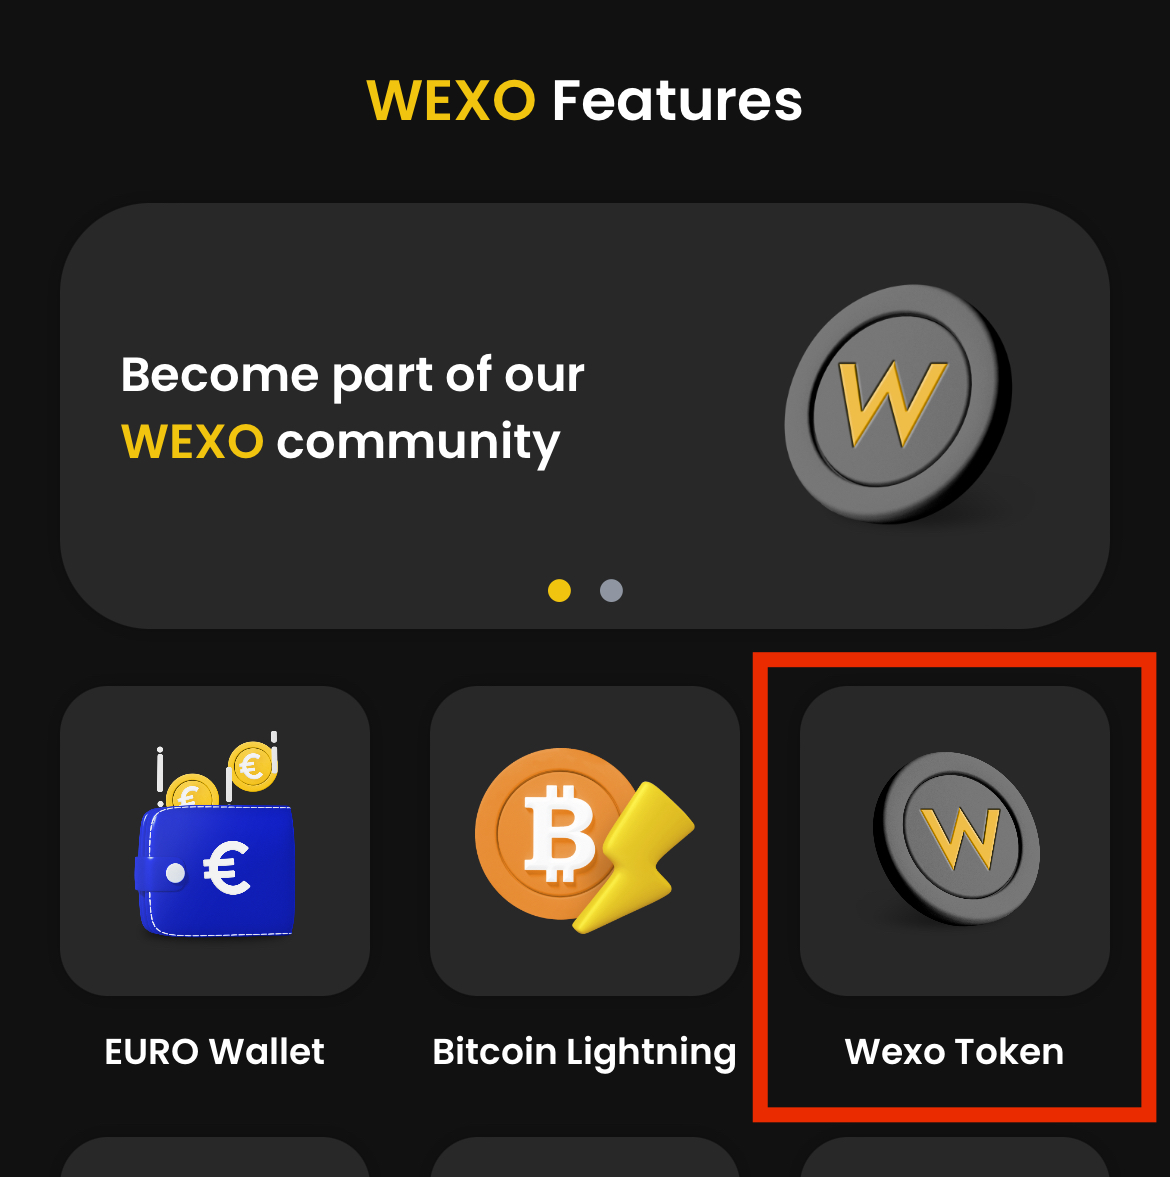 Wexo Features